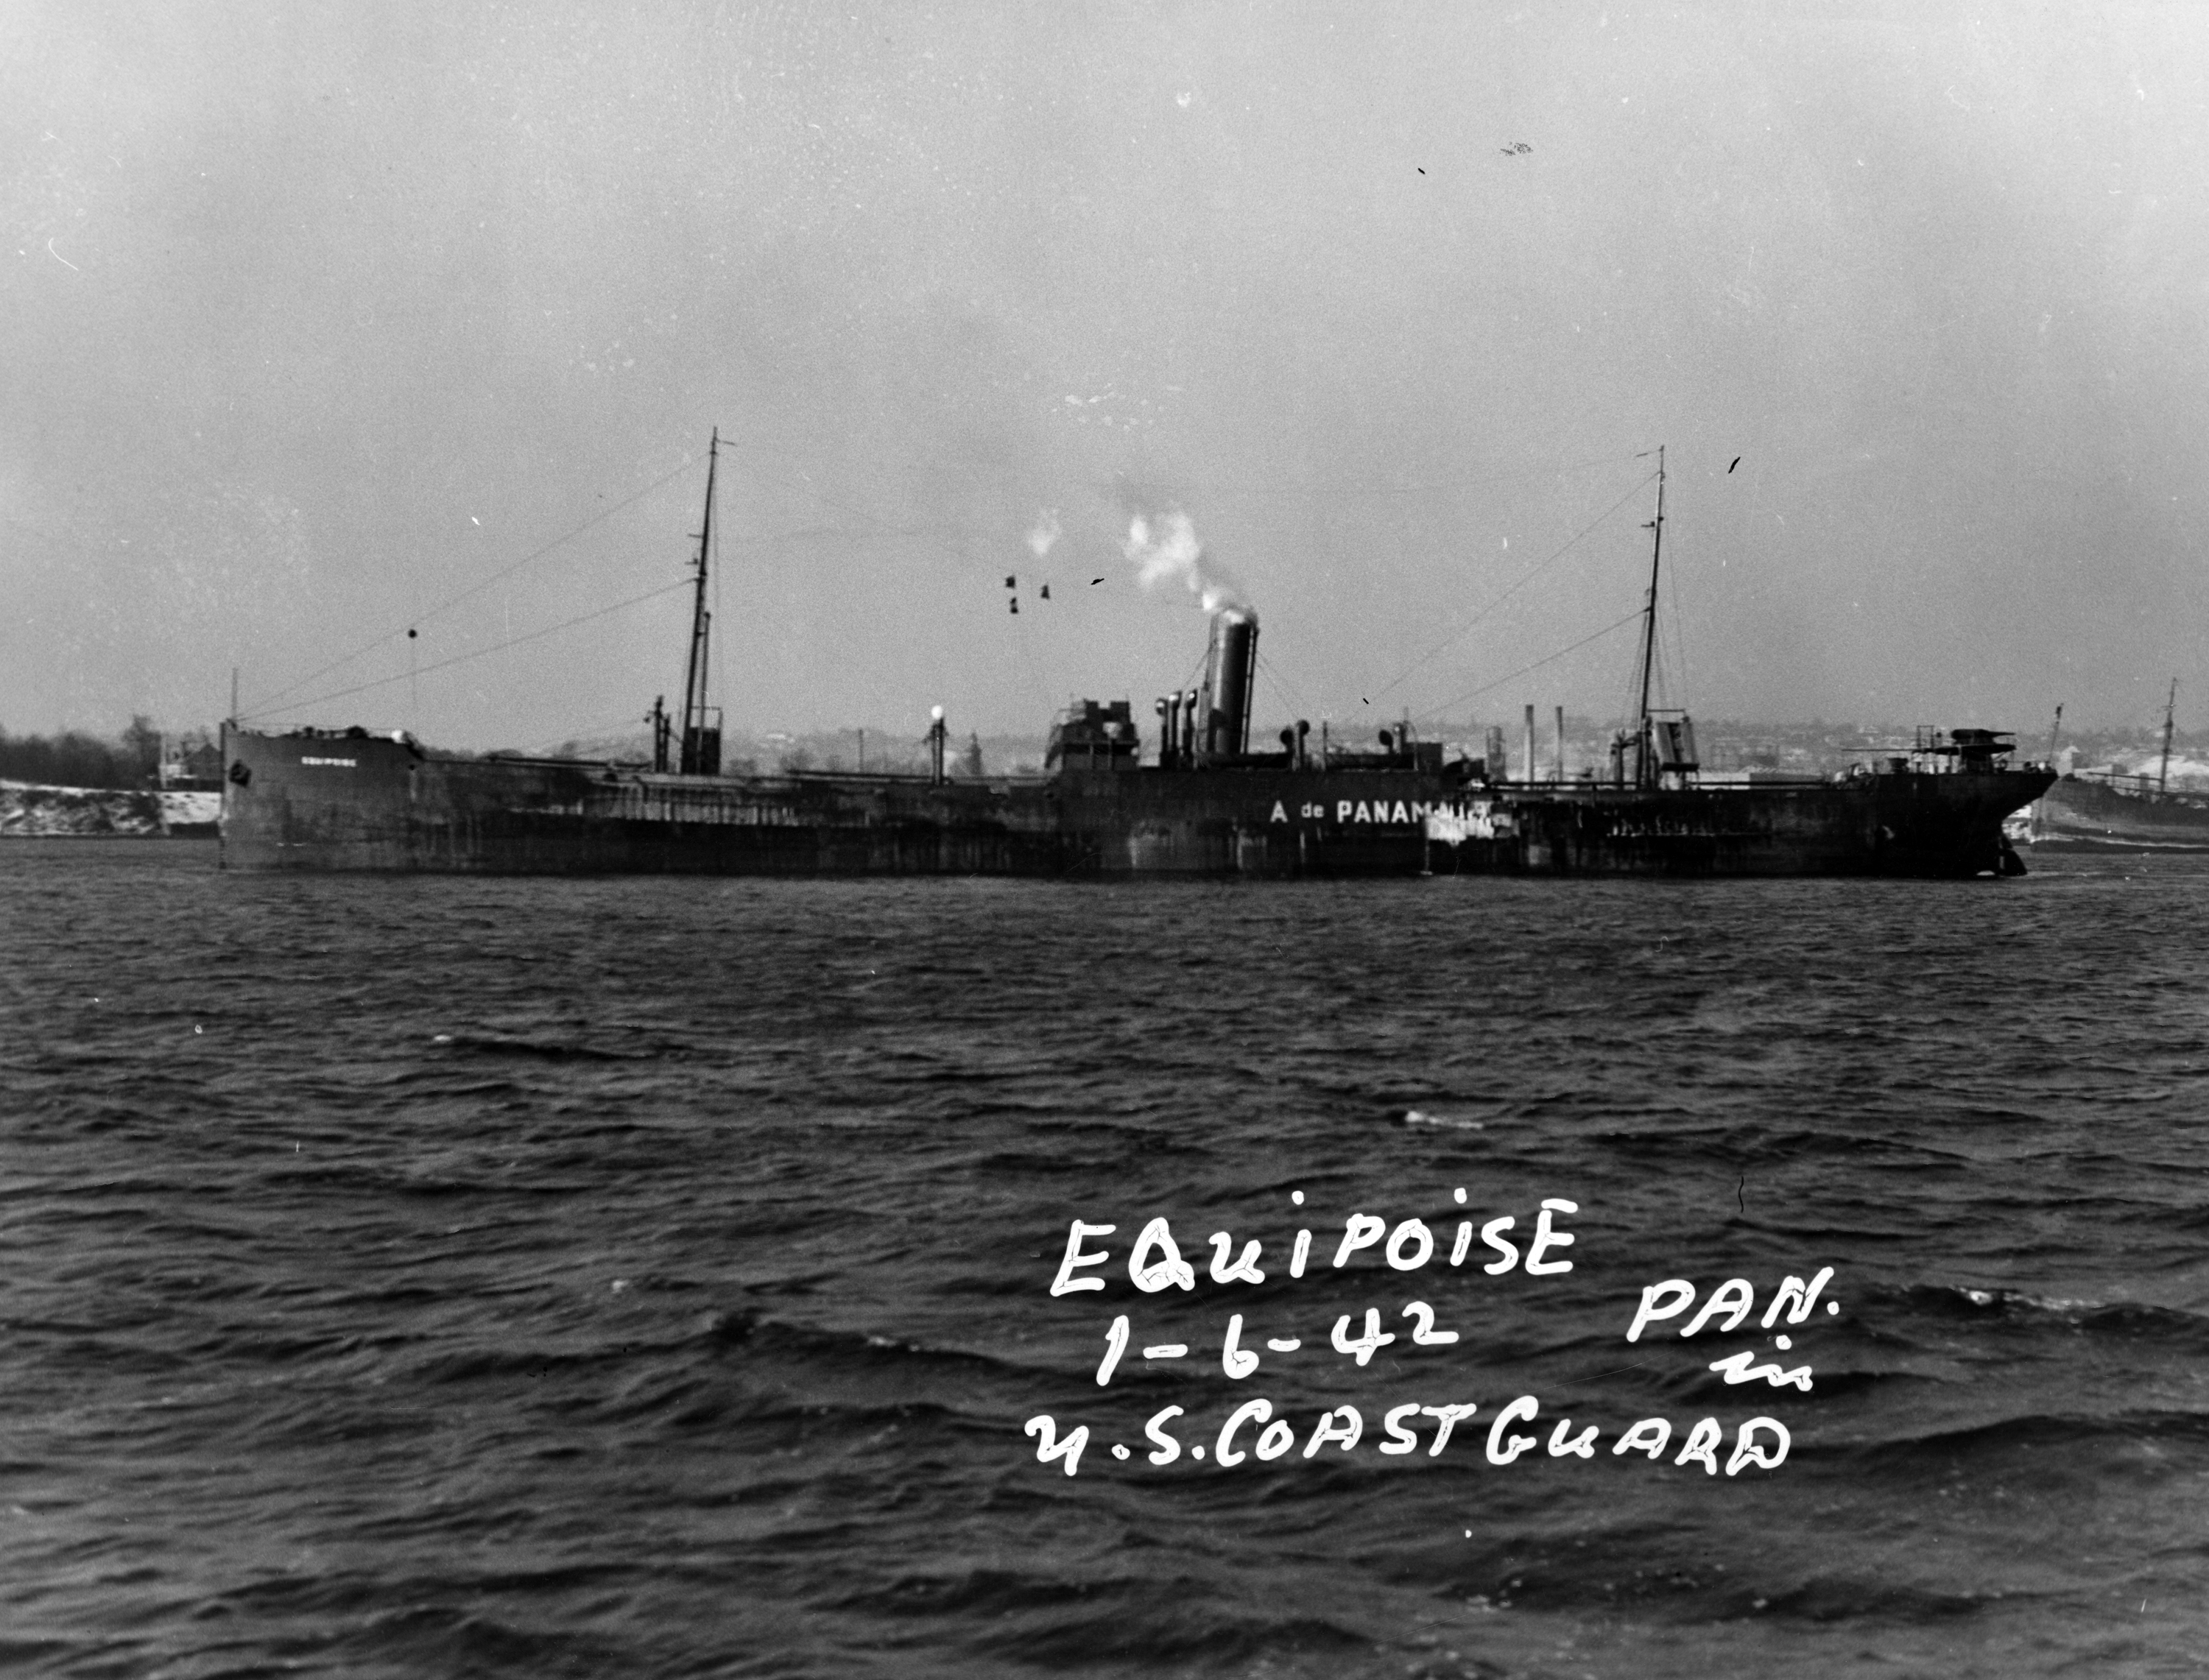 Equipoise, location unknown, dated January 6, 1942